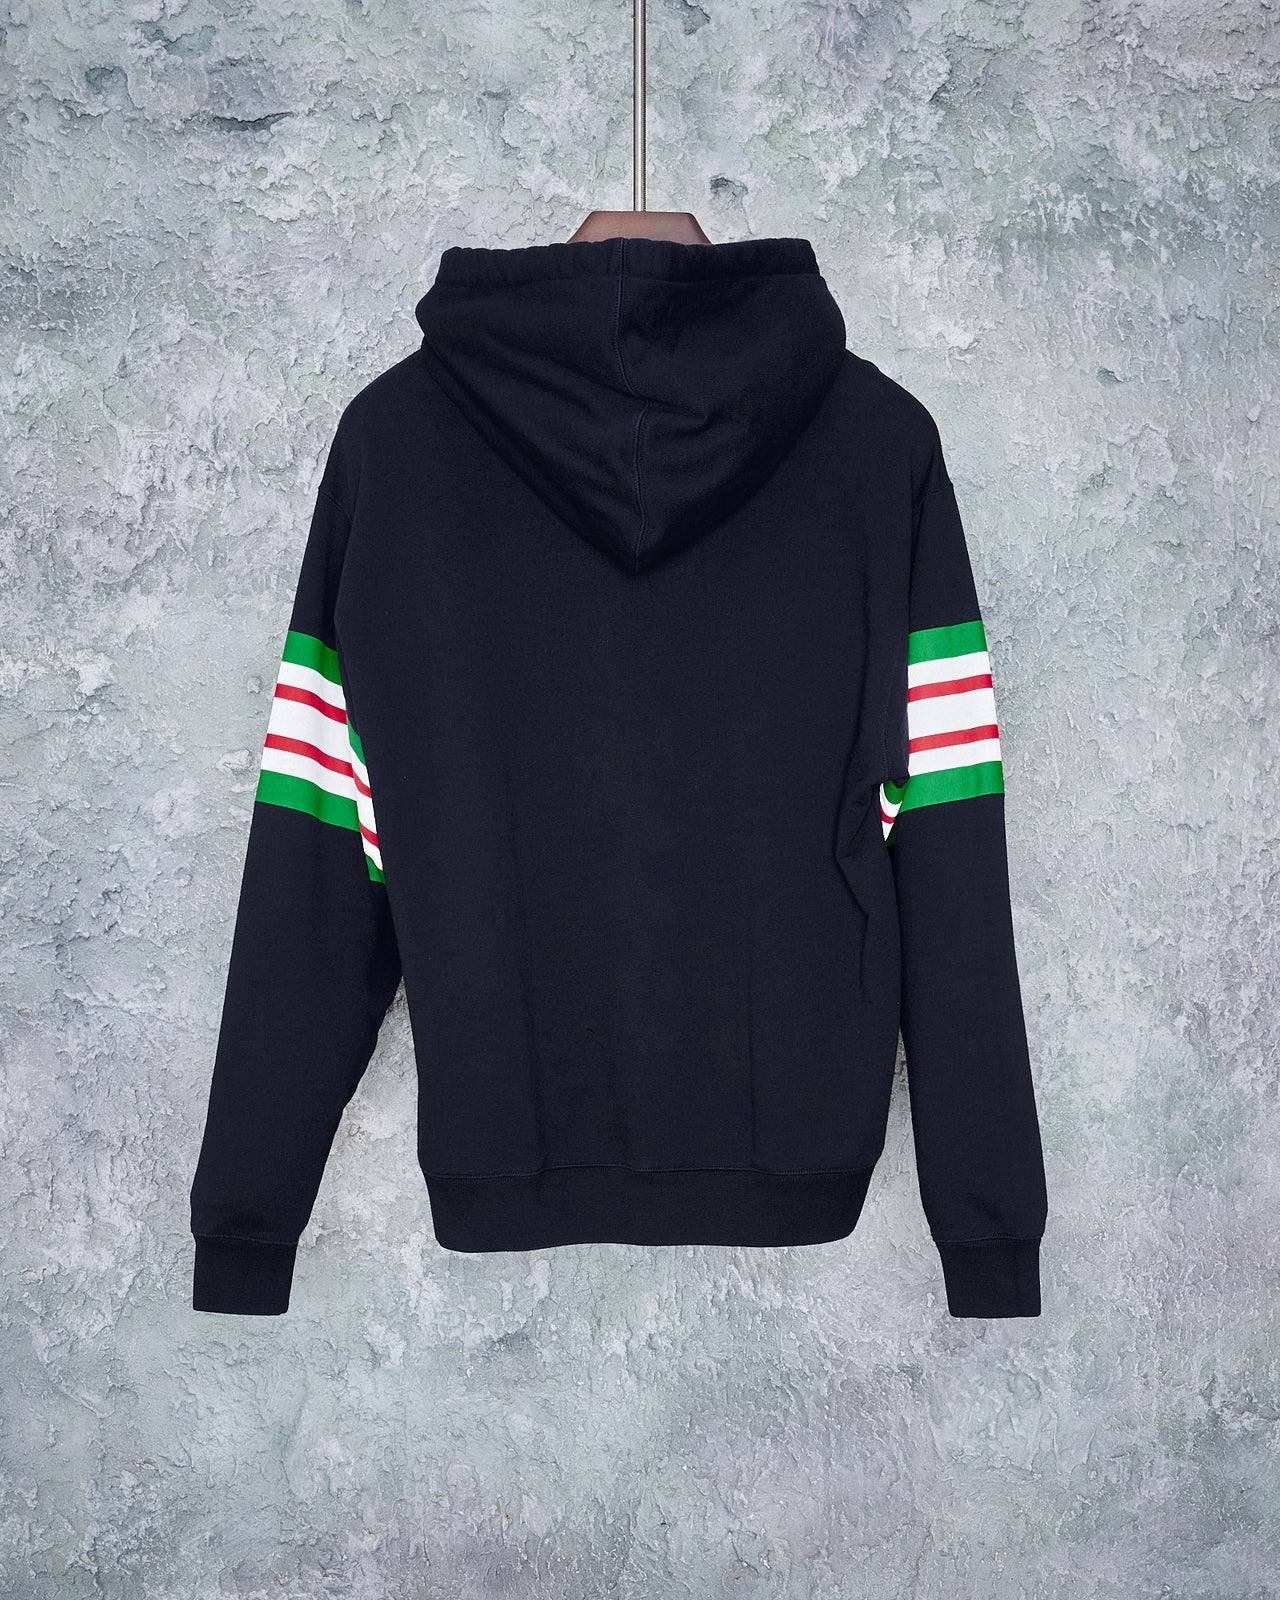 Gucci Interlock G with house stripes hoodie